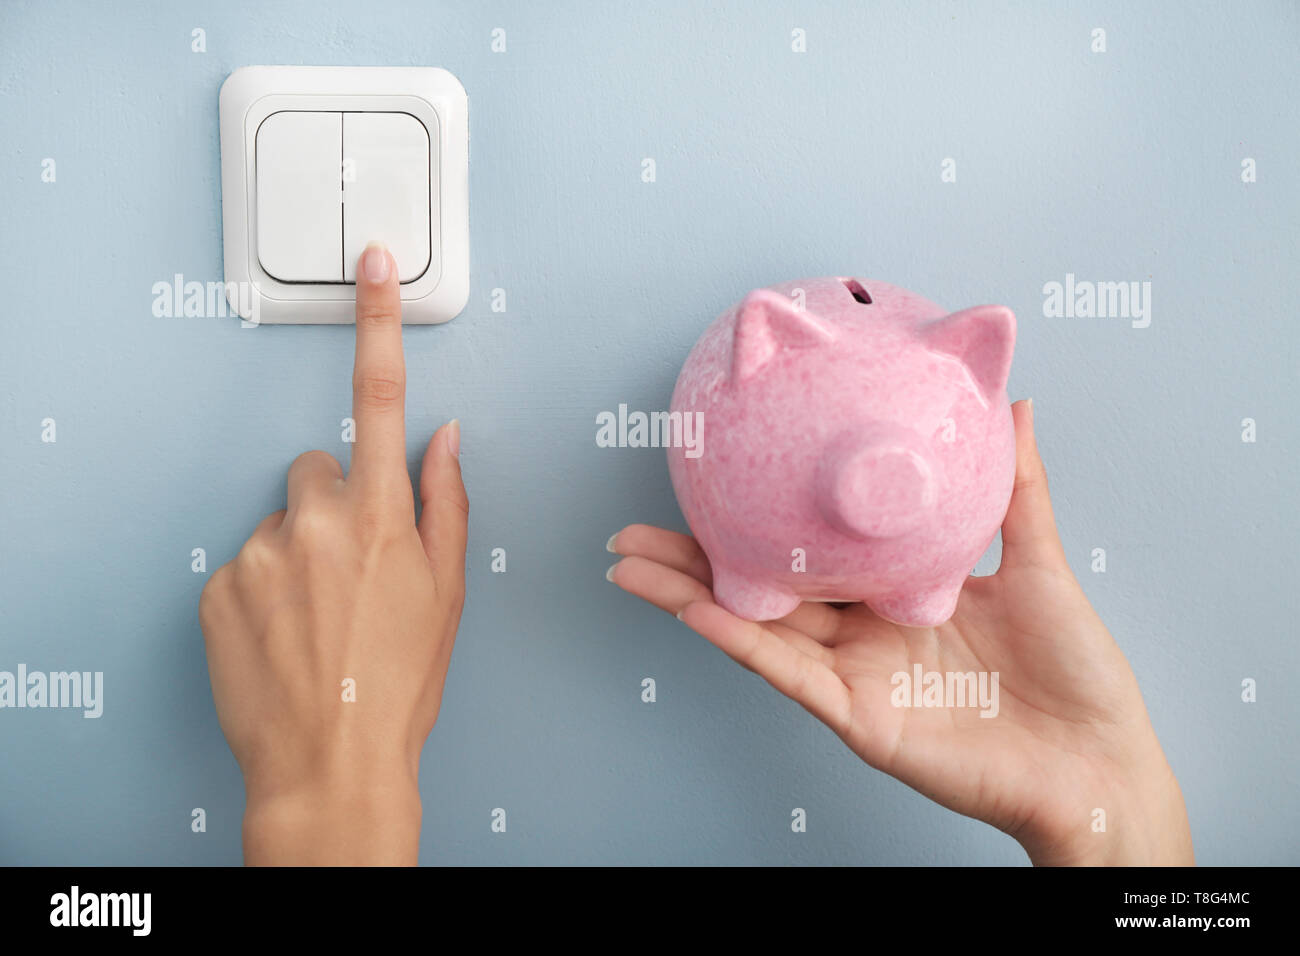 Woman with piggy bank switching off the light. Electricity saving concept Stock Photo